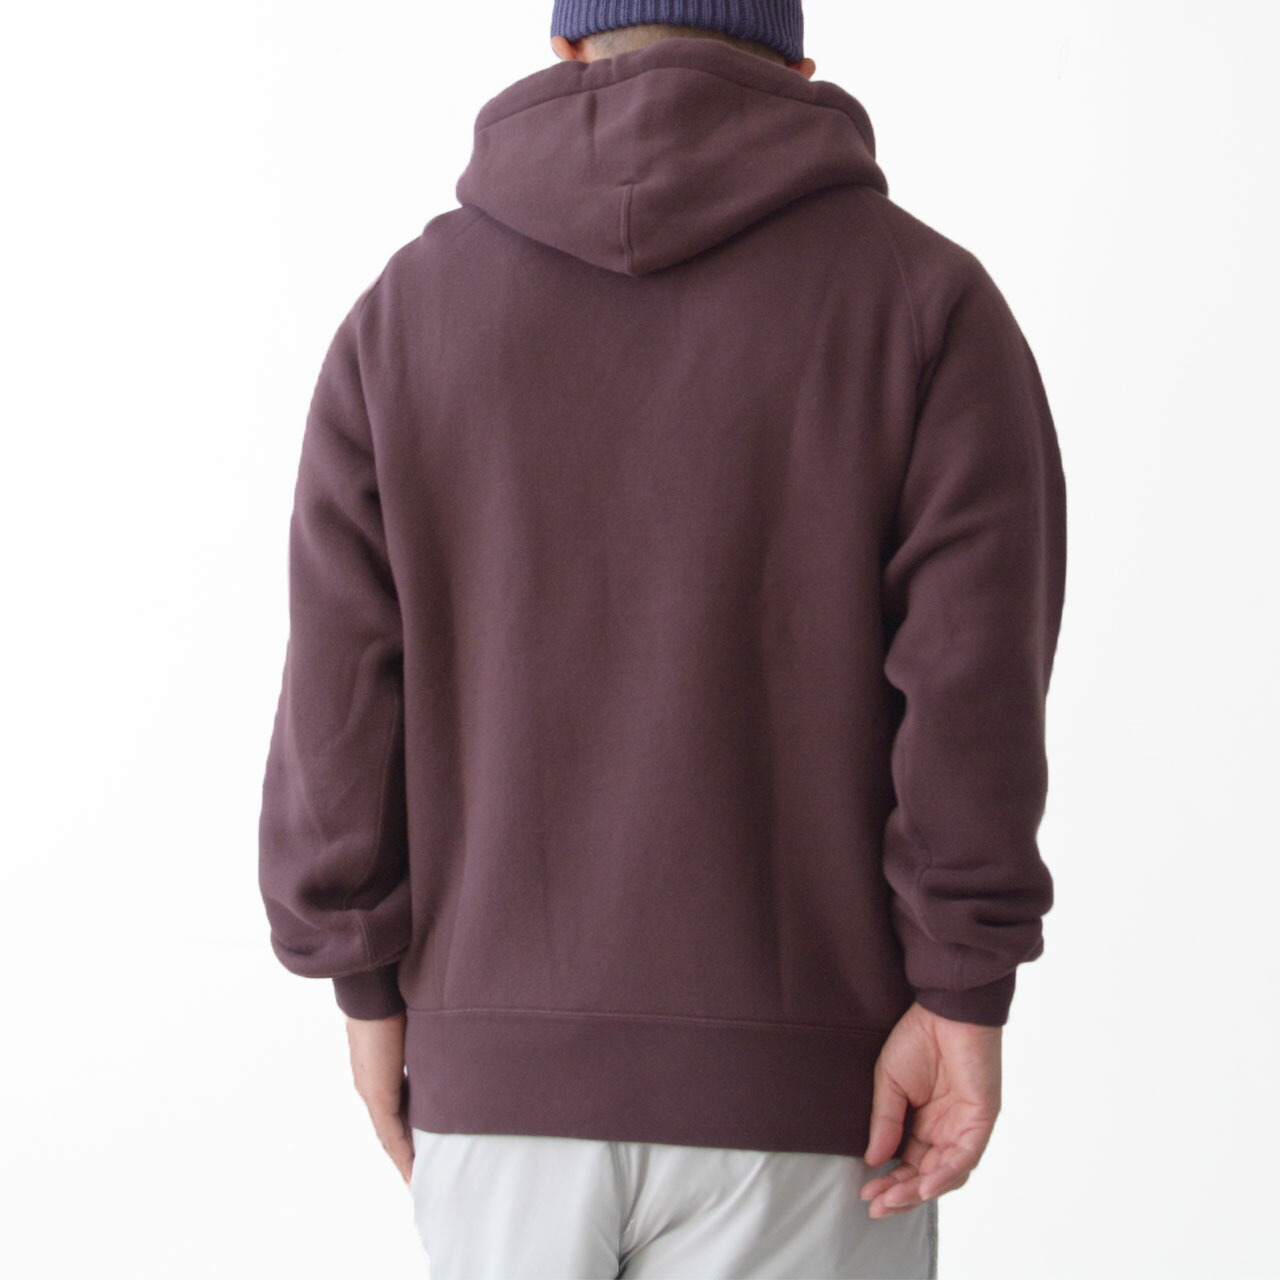 Gymphlex [ジムフレックス] SWING SLEEVE PULLOVER HOODIE [GY-C0014 ARB]_f0051306_13541338.jpg